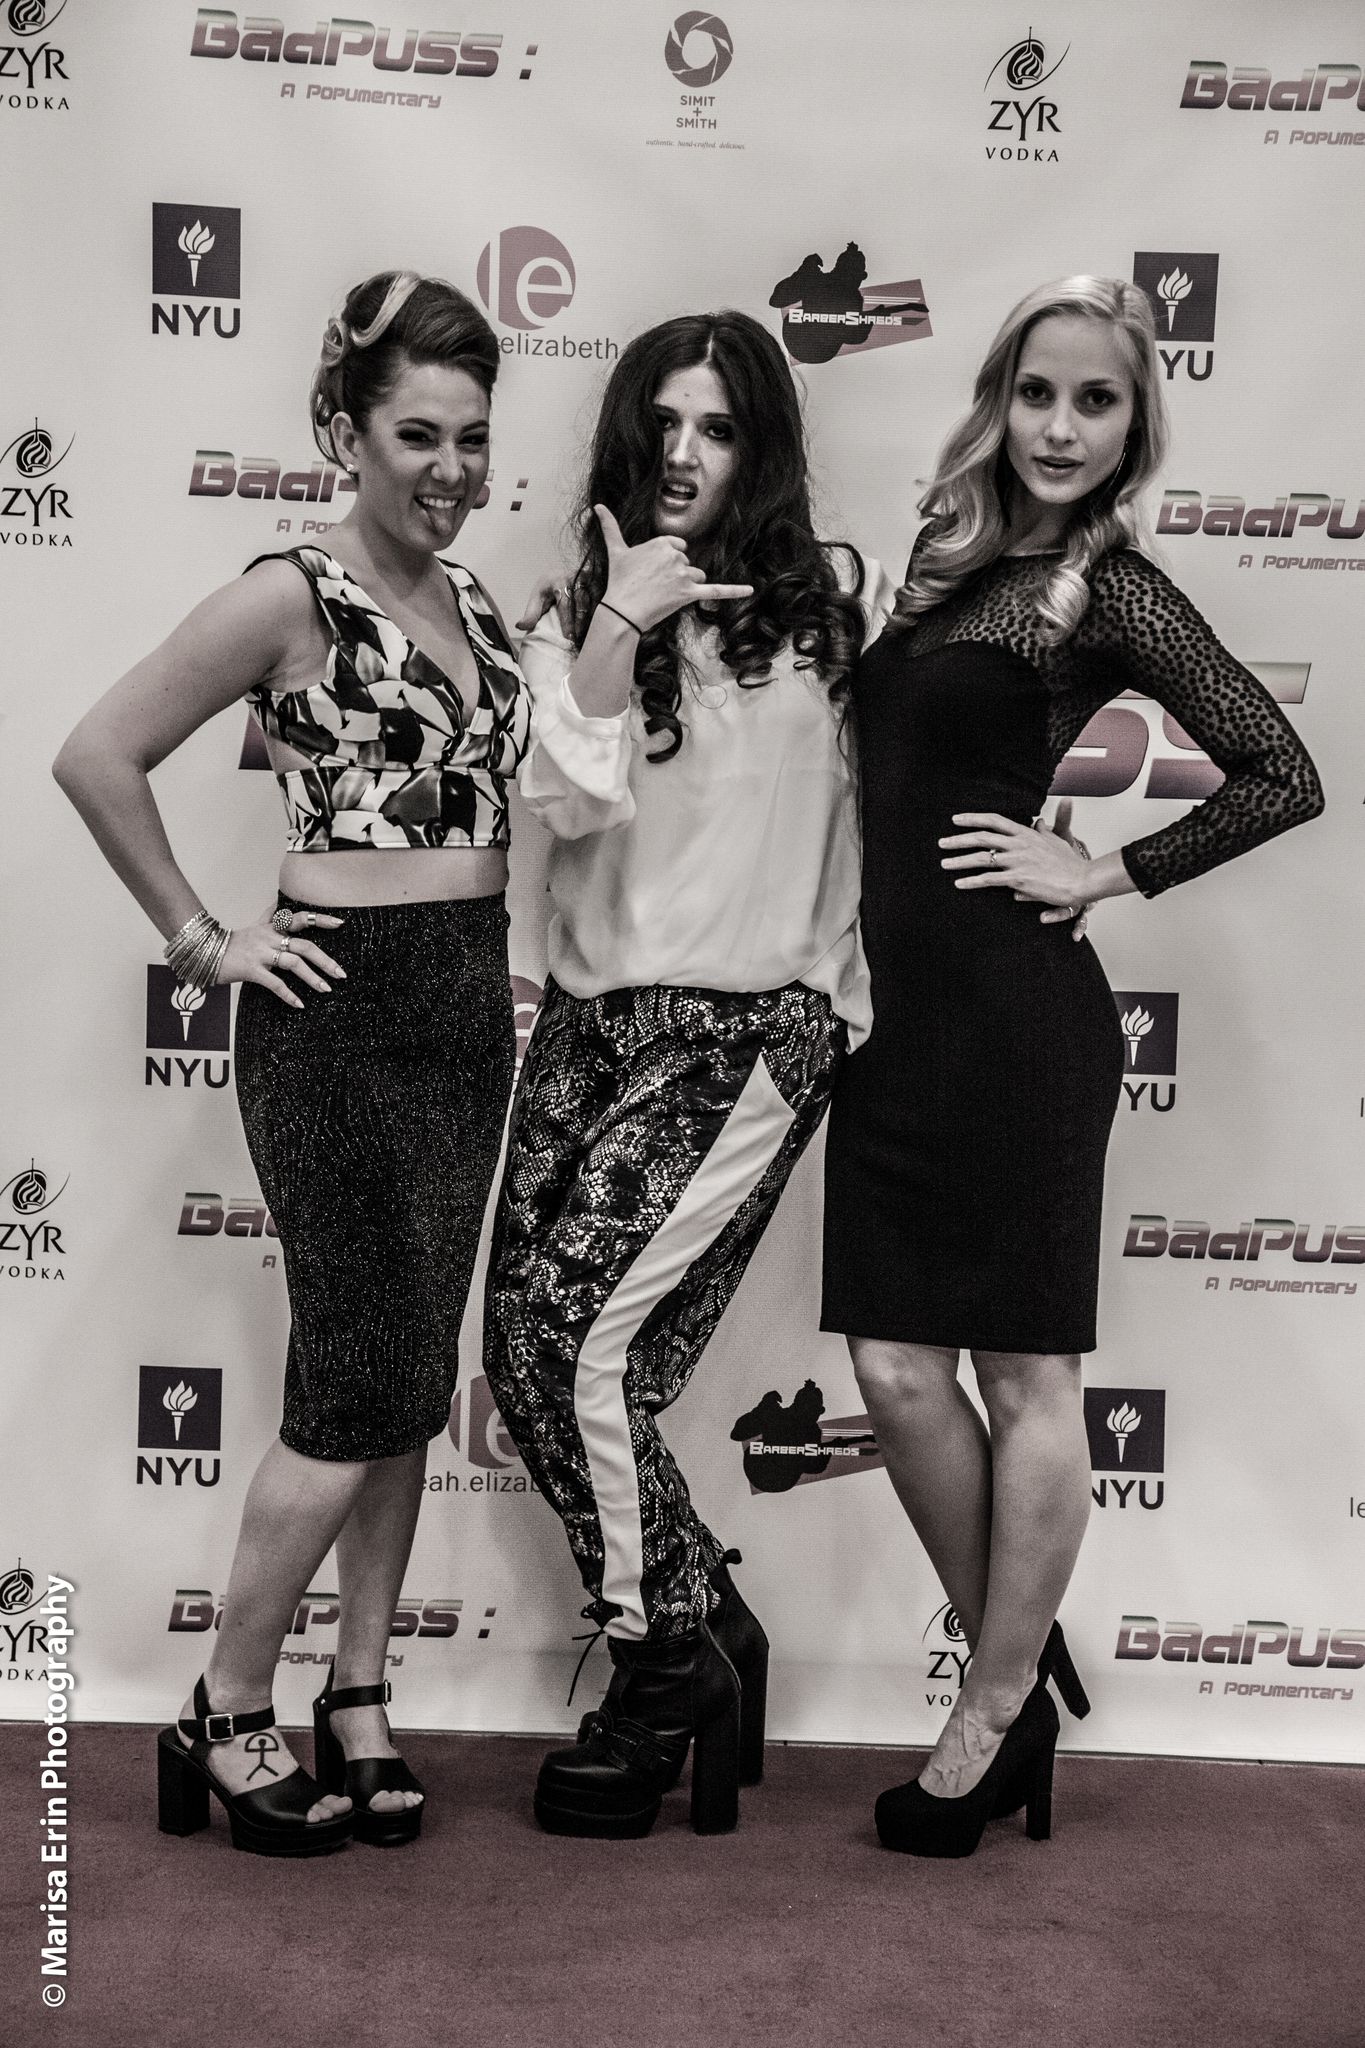 Leah Elizabeth Rucinski, Emily Wiest and Hannah Sorenson celebrating at the World Premier of BadPuss: A Popumentary.